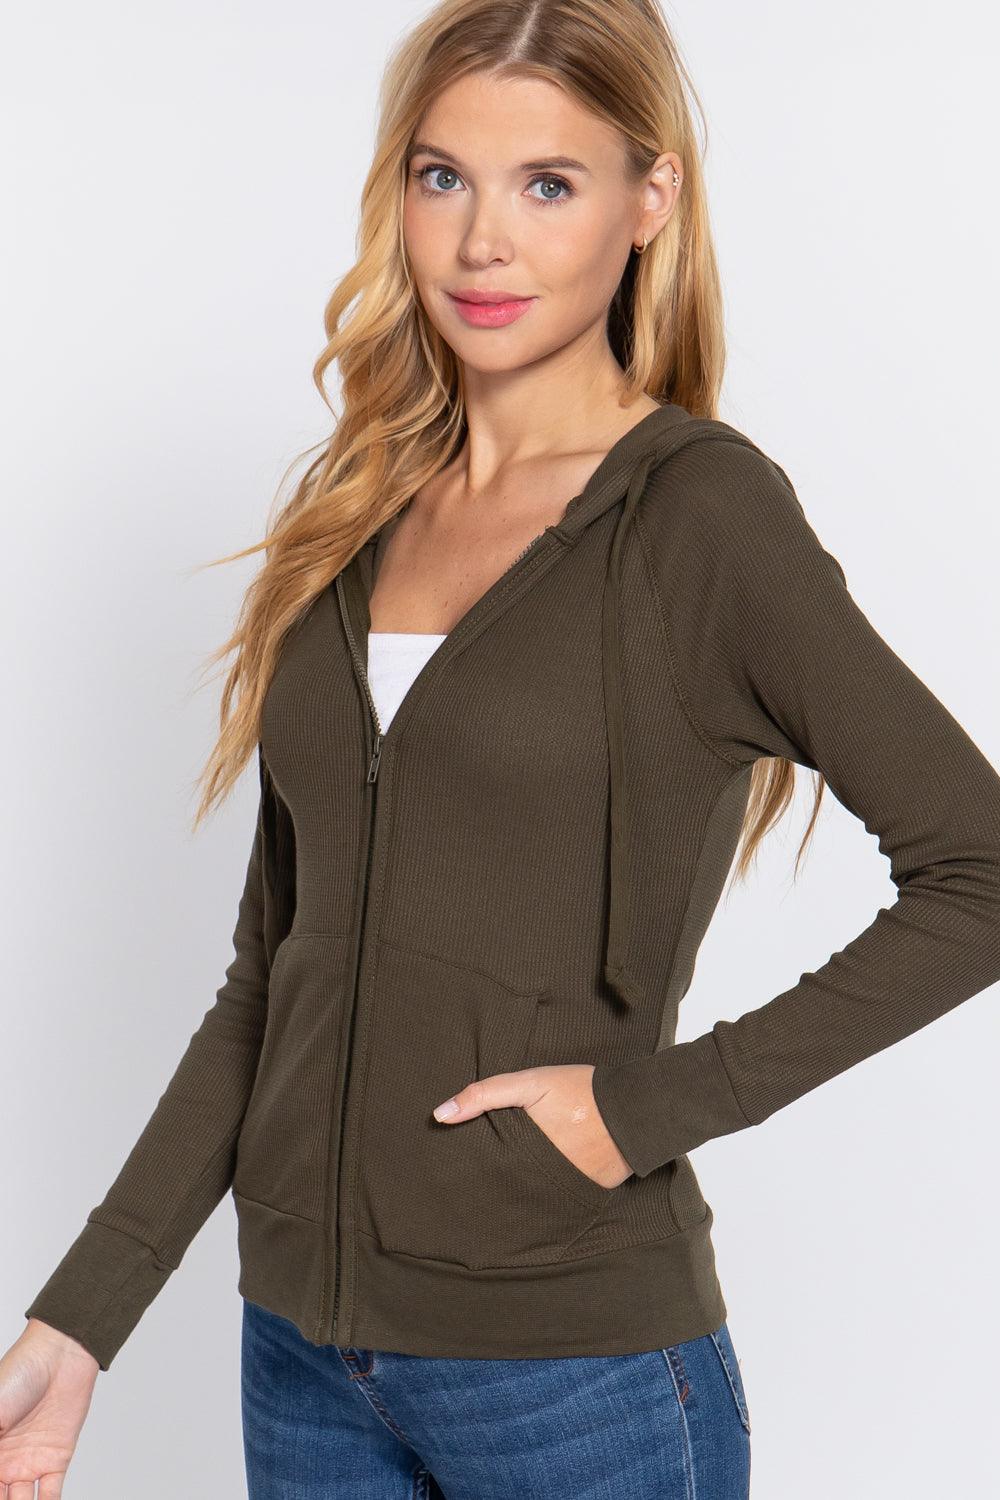 Buying Guide: Stylish and Healthy Dresses 2023 | Fashionably Fit | Thermal Hoodie Jacket